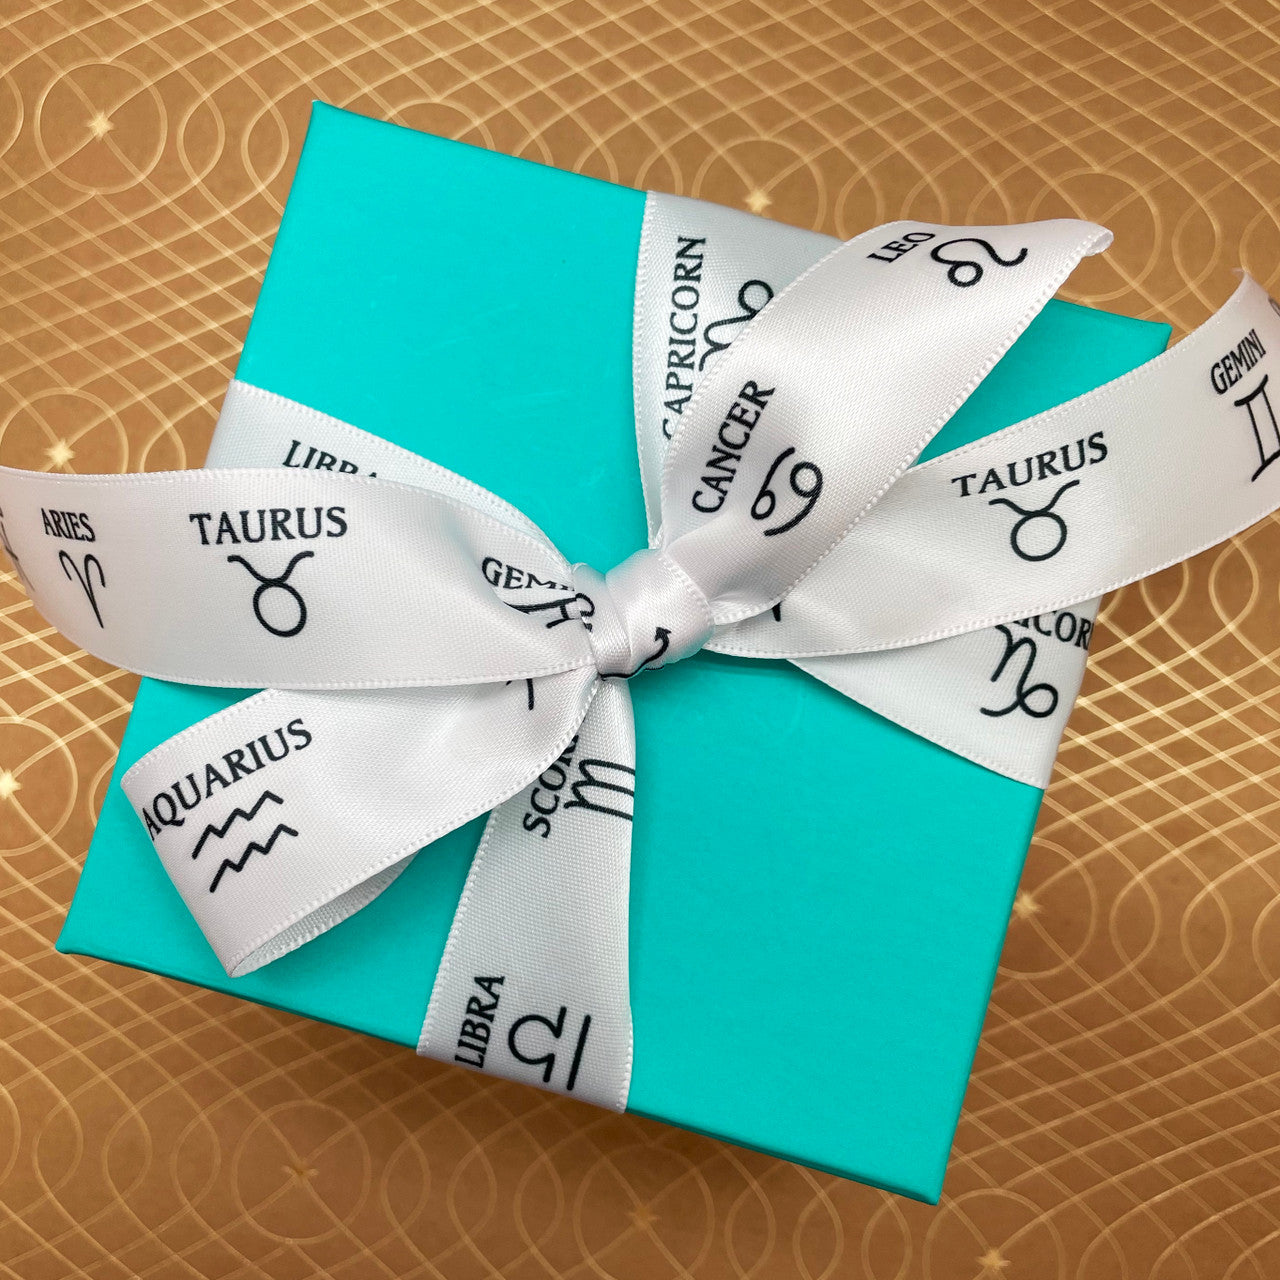 Tie a pretty bow on a gift for your astrology enthusiast!